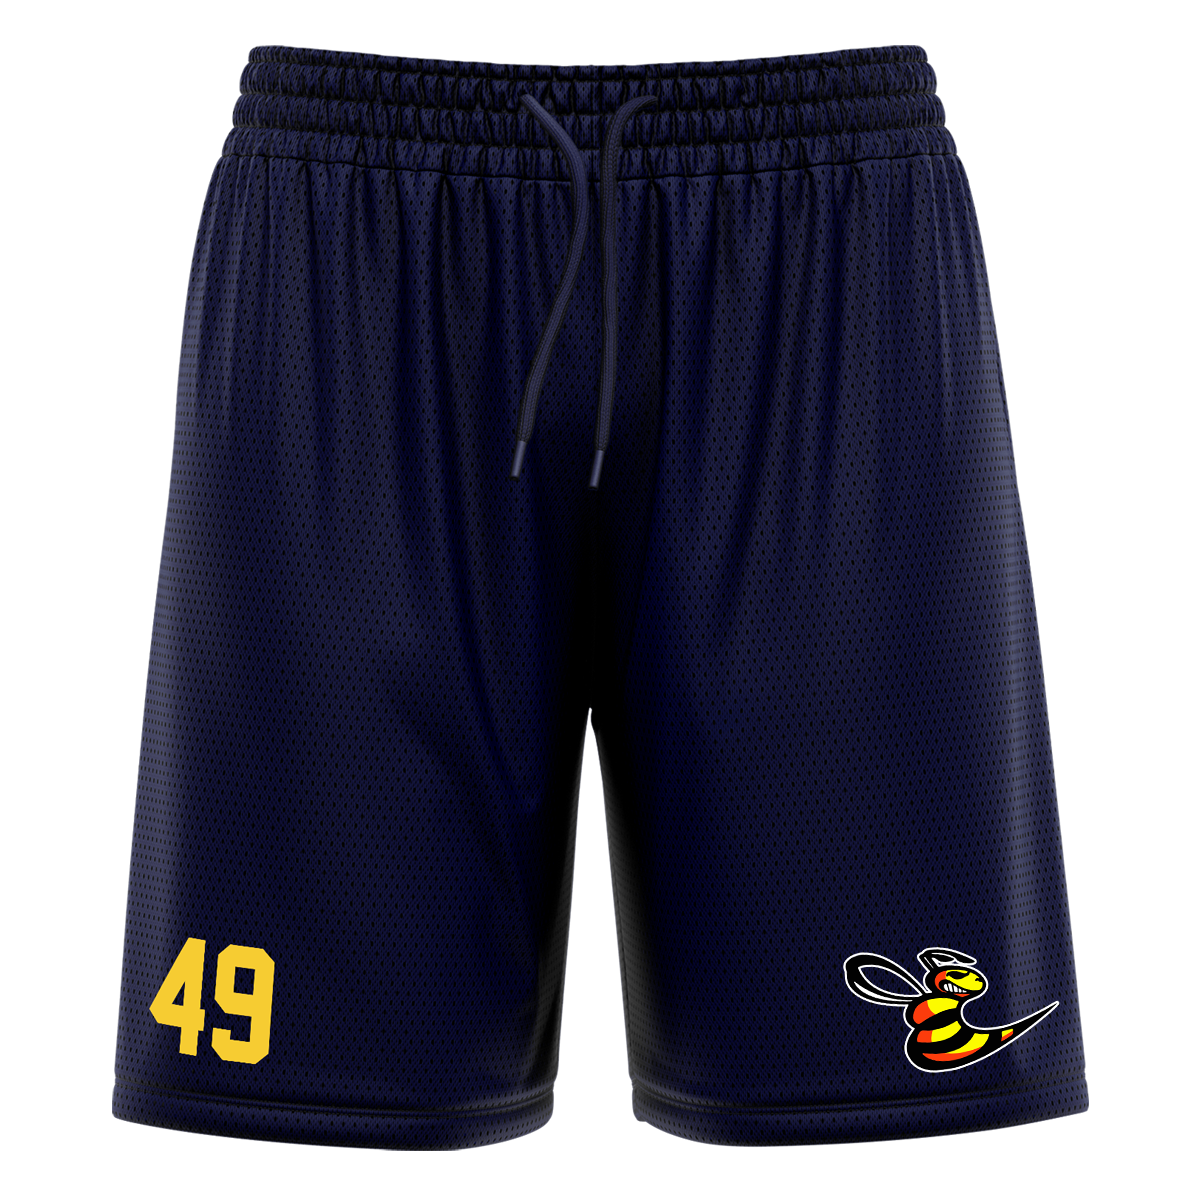 Hornets Athletic Mesh-Short with Playernumber/Initials